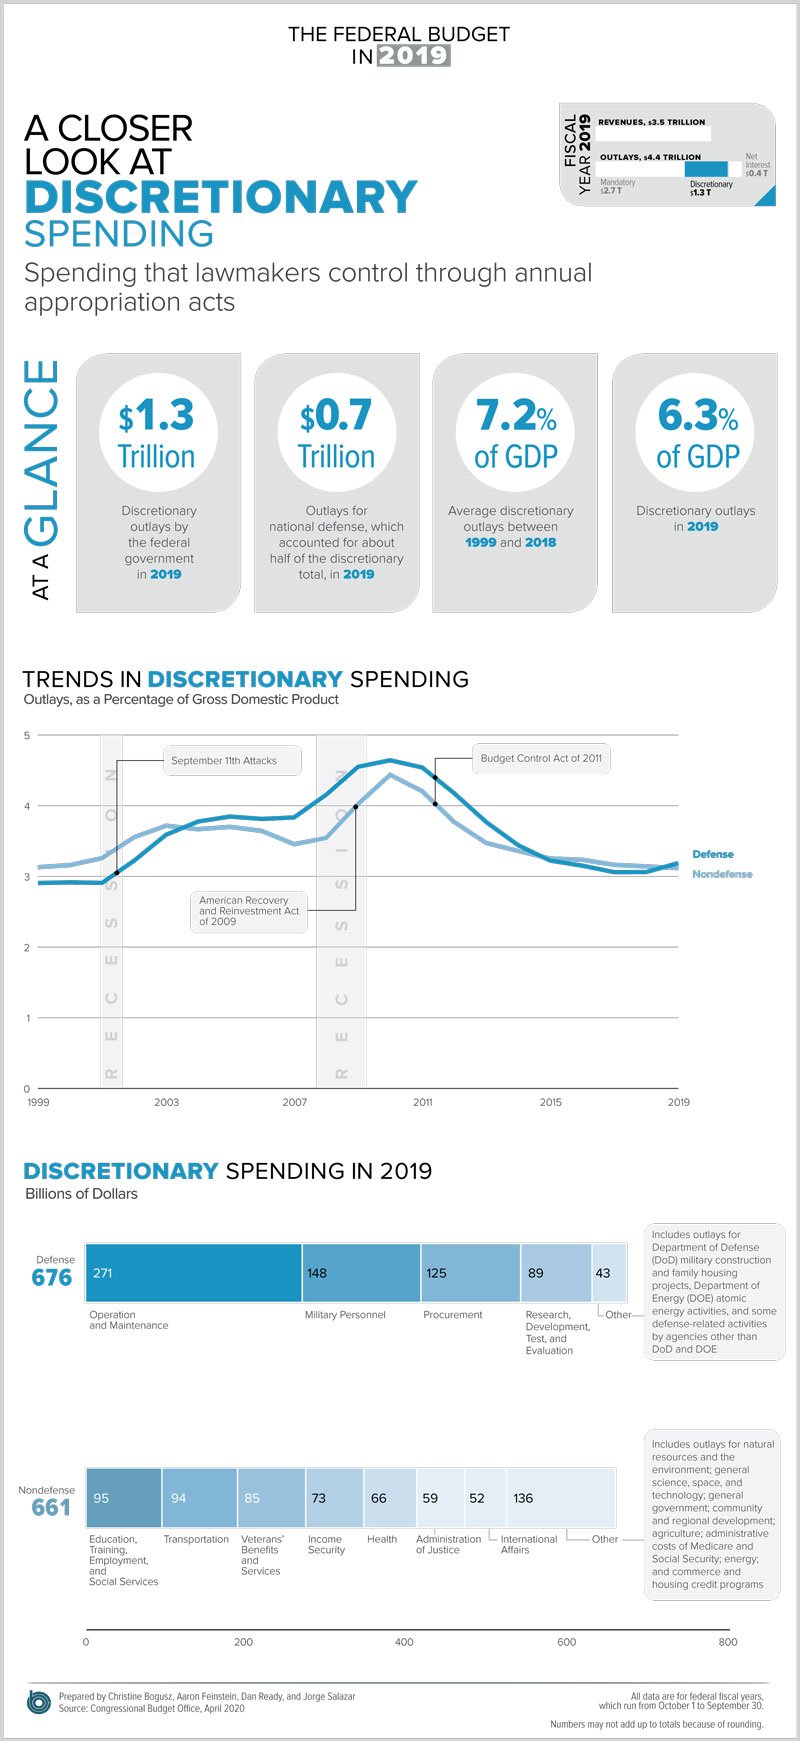 A closer look at discretionary spending